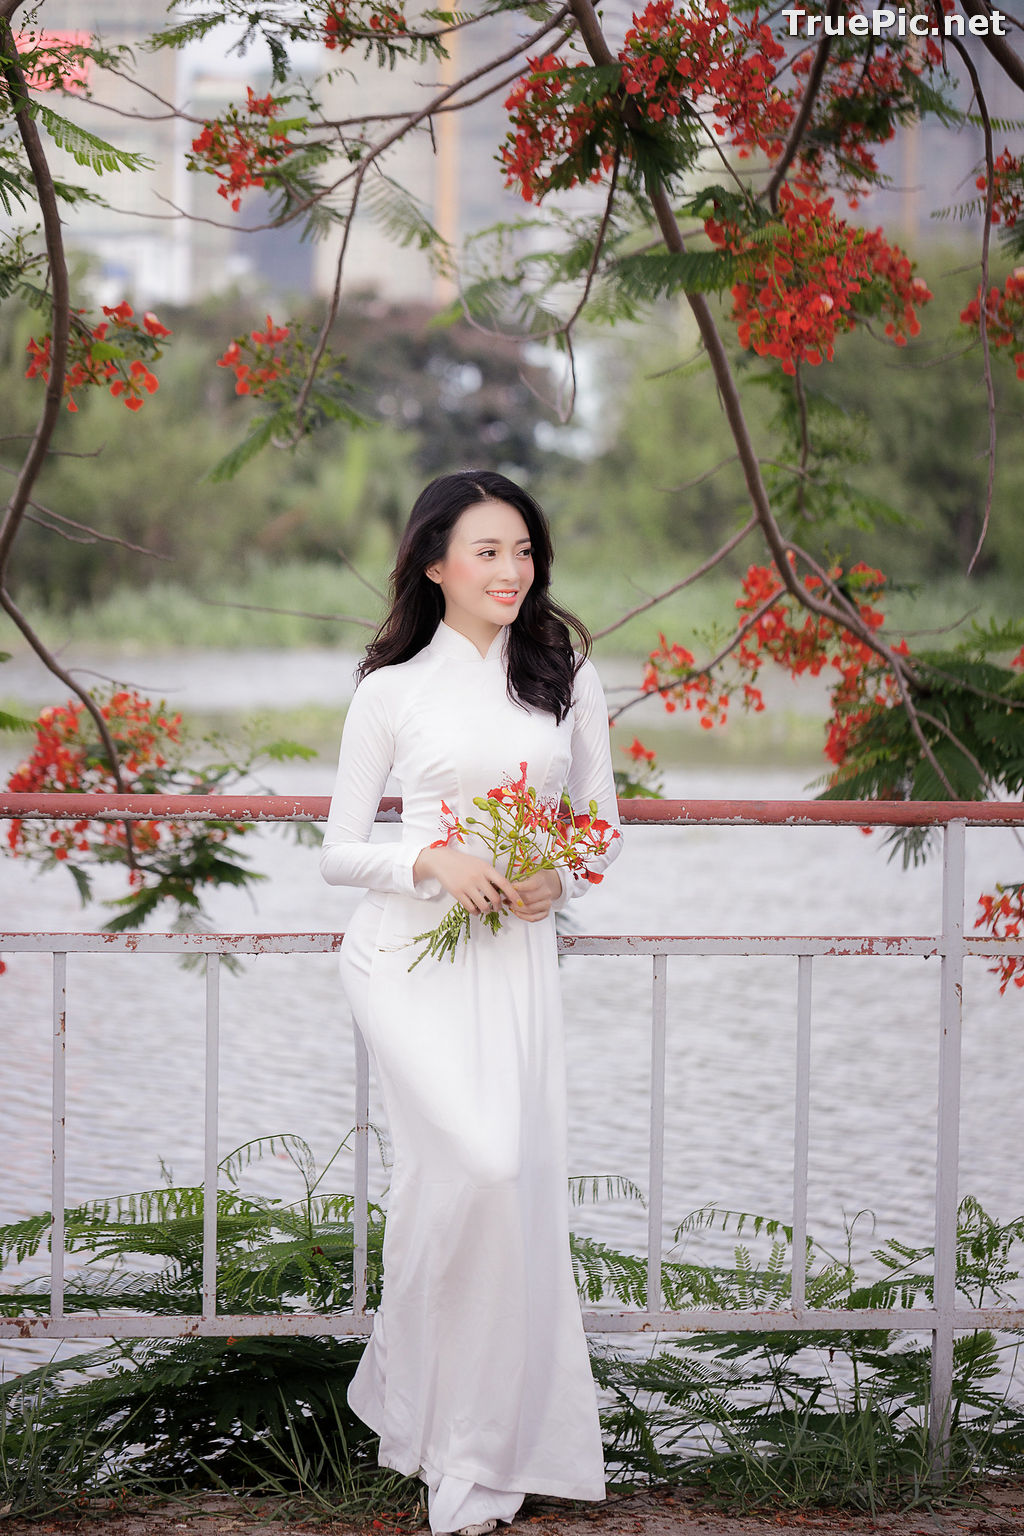 Image The Beauty of Vietnamese Girls with Traditional Dress (Ao Dai) #3 - TruePic.net - Picture-33